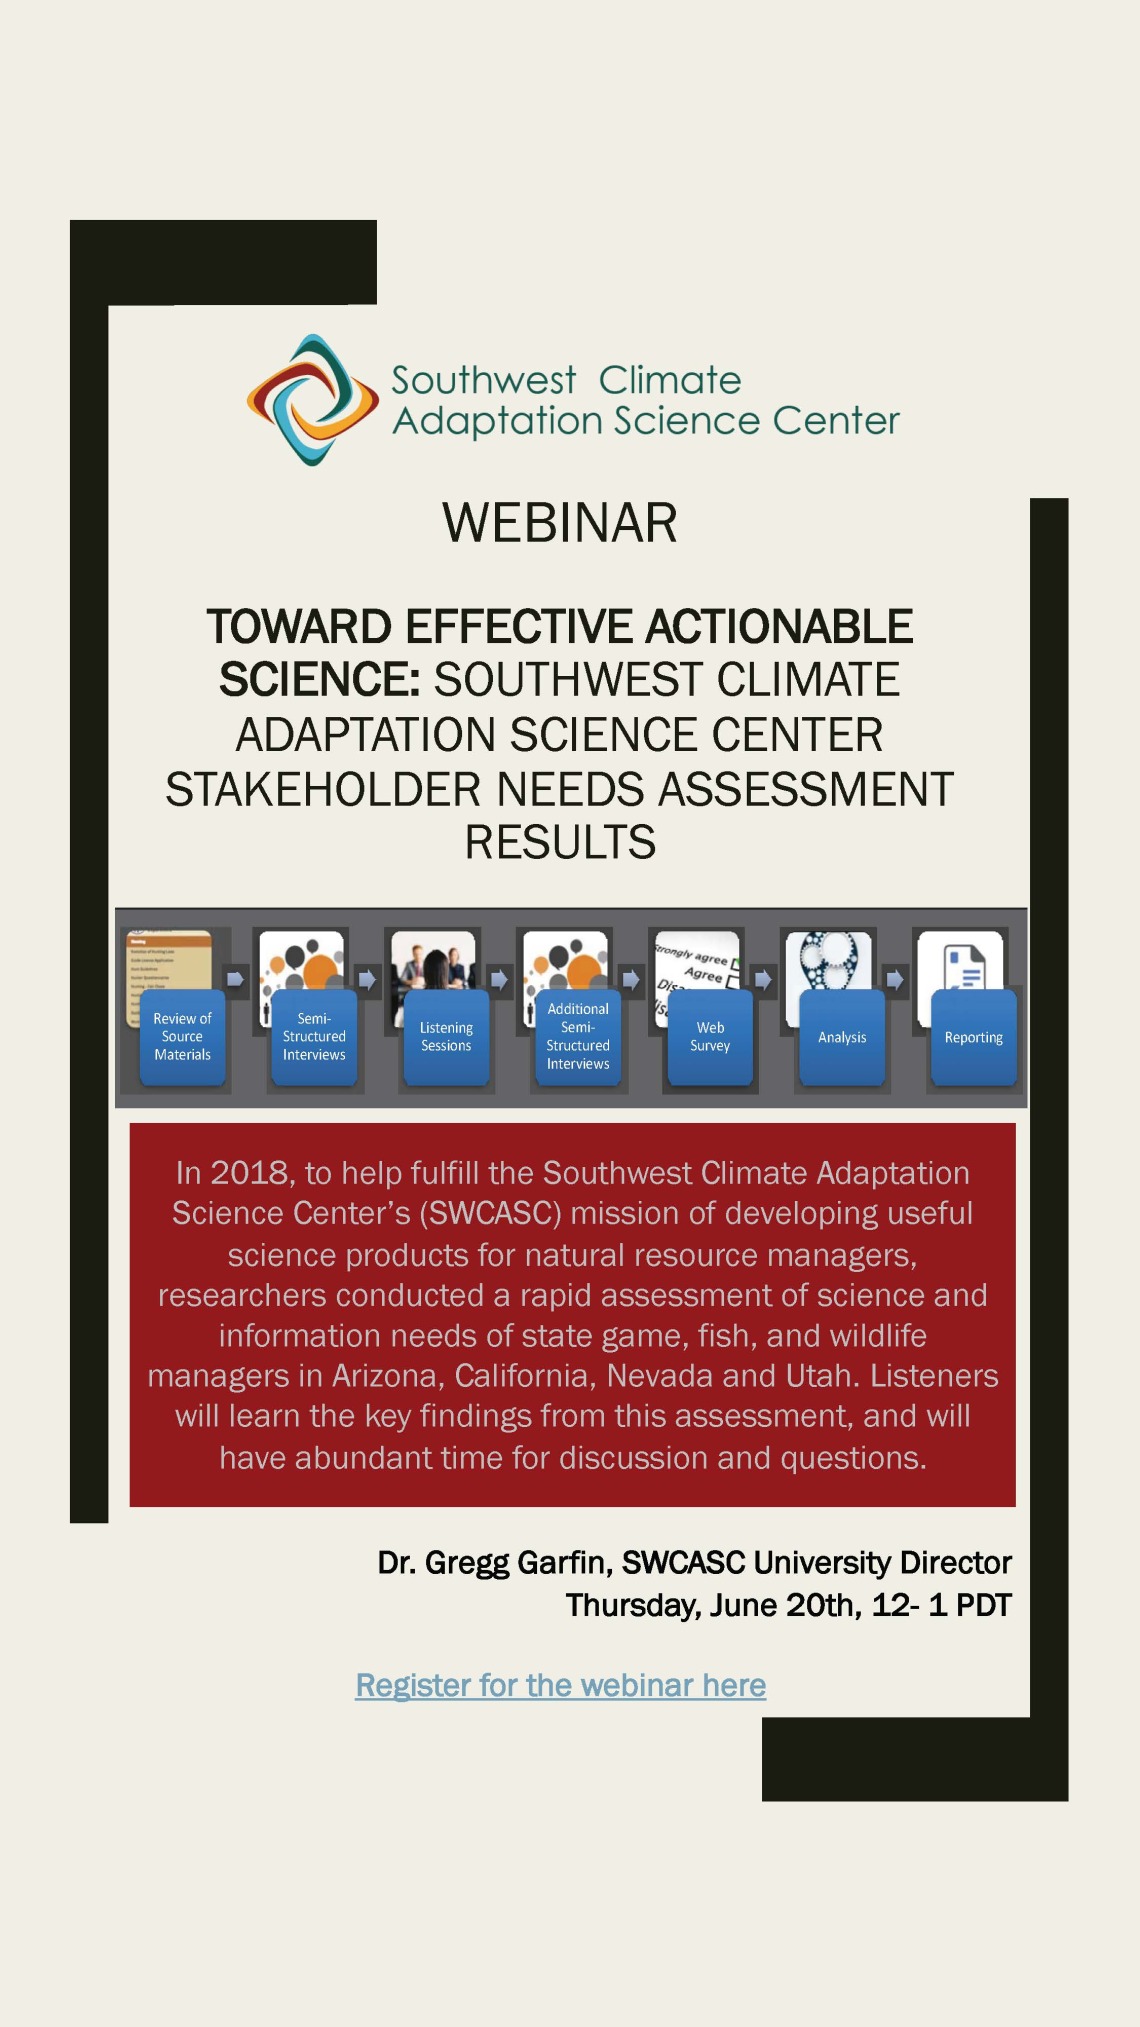 Flyer for the webinar titled: Toward Effective Actionable Science: Southwest Climate Adaptation Science Center Stakeholder Needs Assessment Results